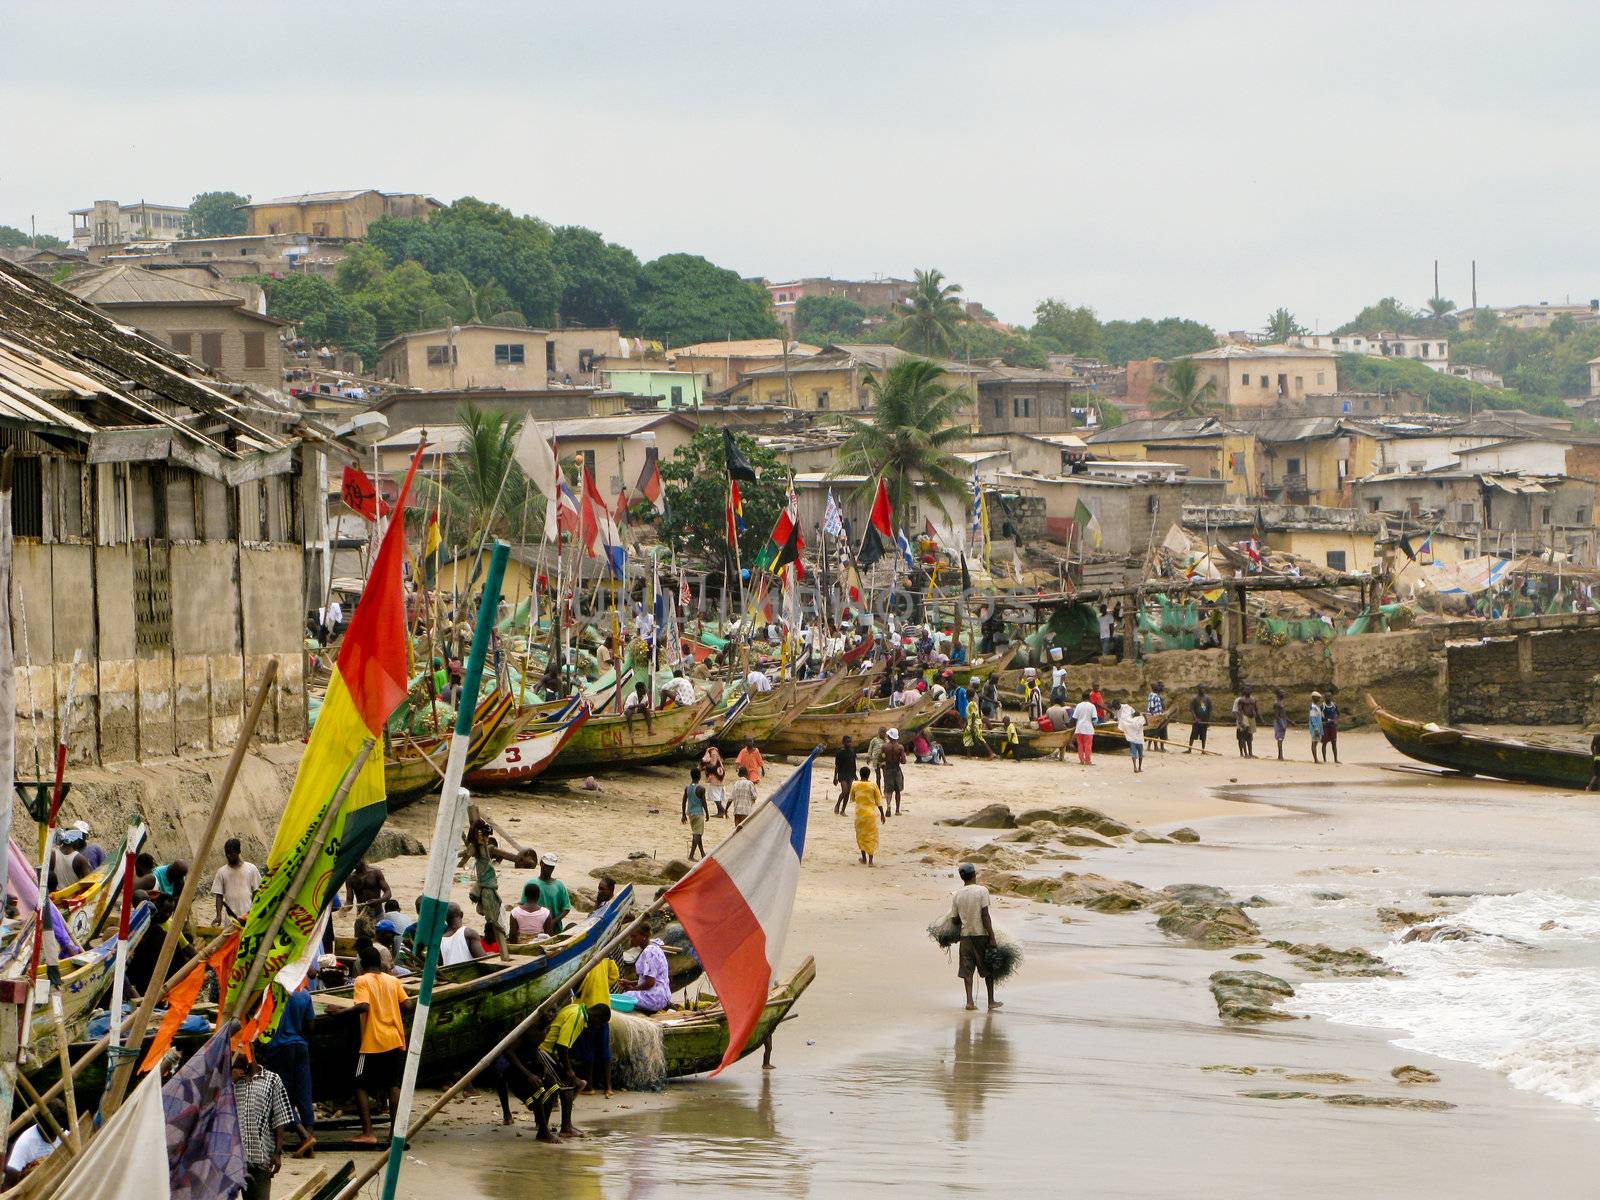 Boats on beach at Cape Coast by steheap